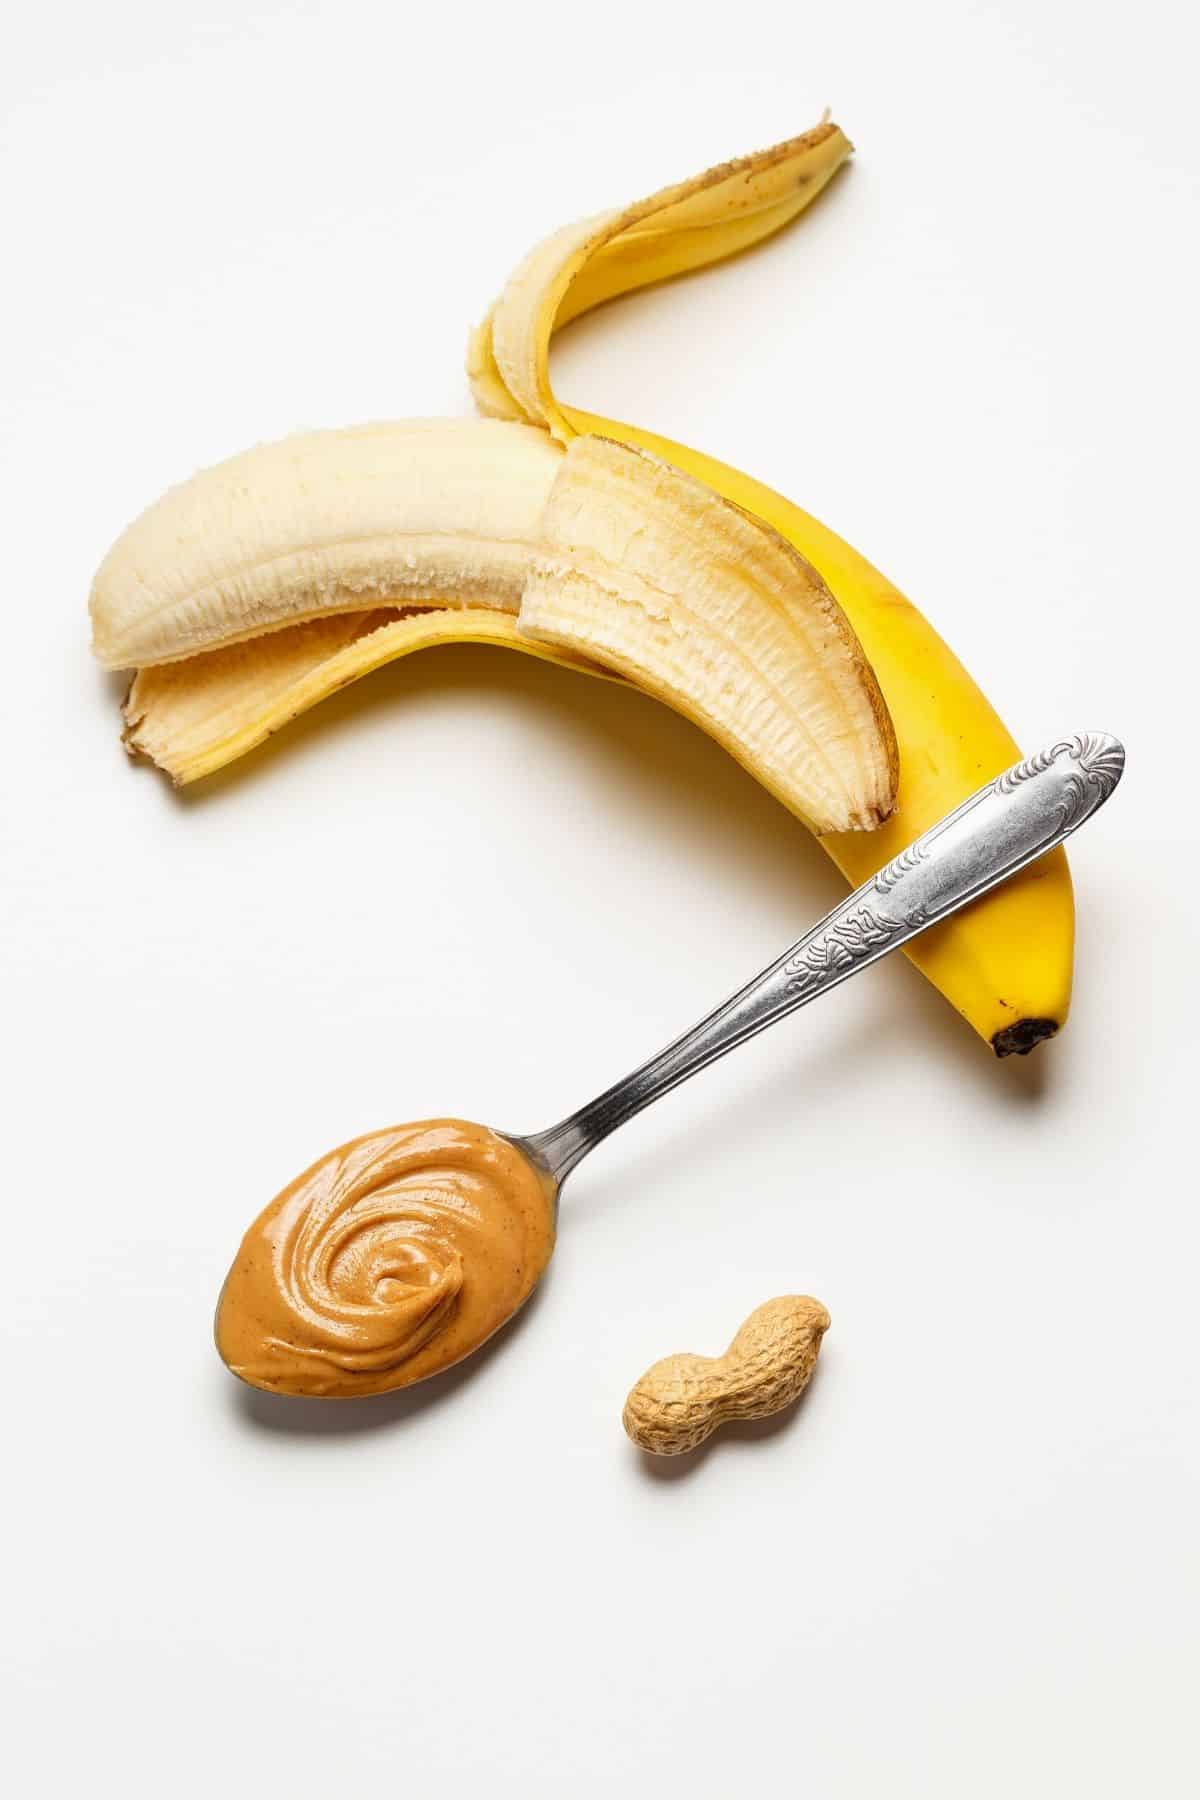 Banana with a spoon of peanut butter and a peanut.